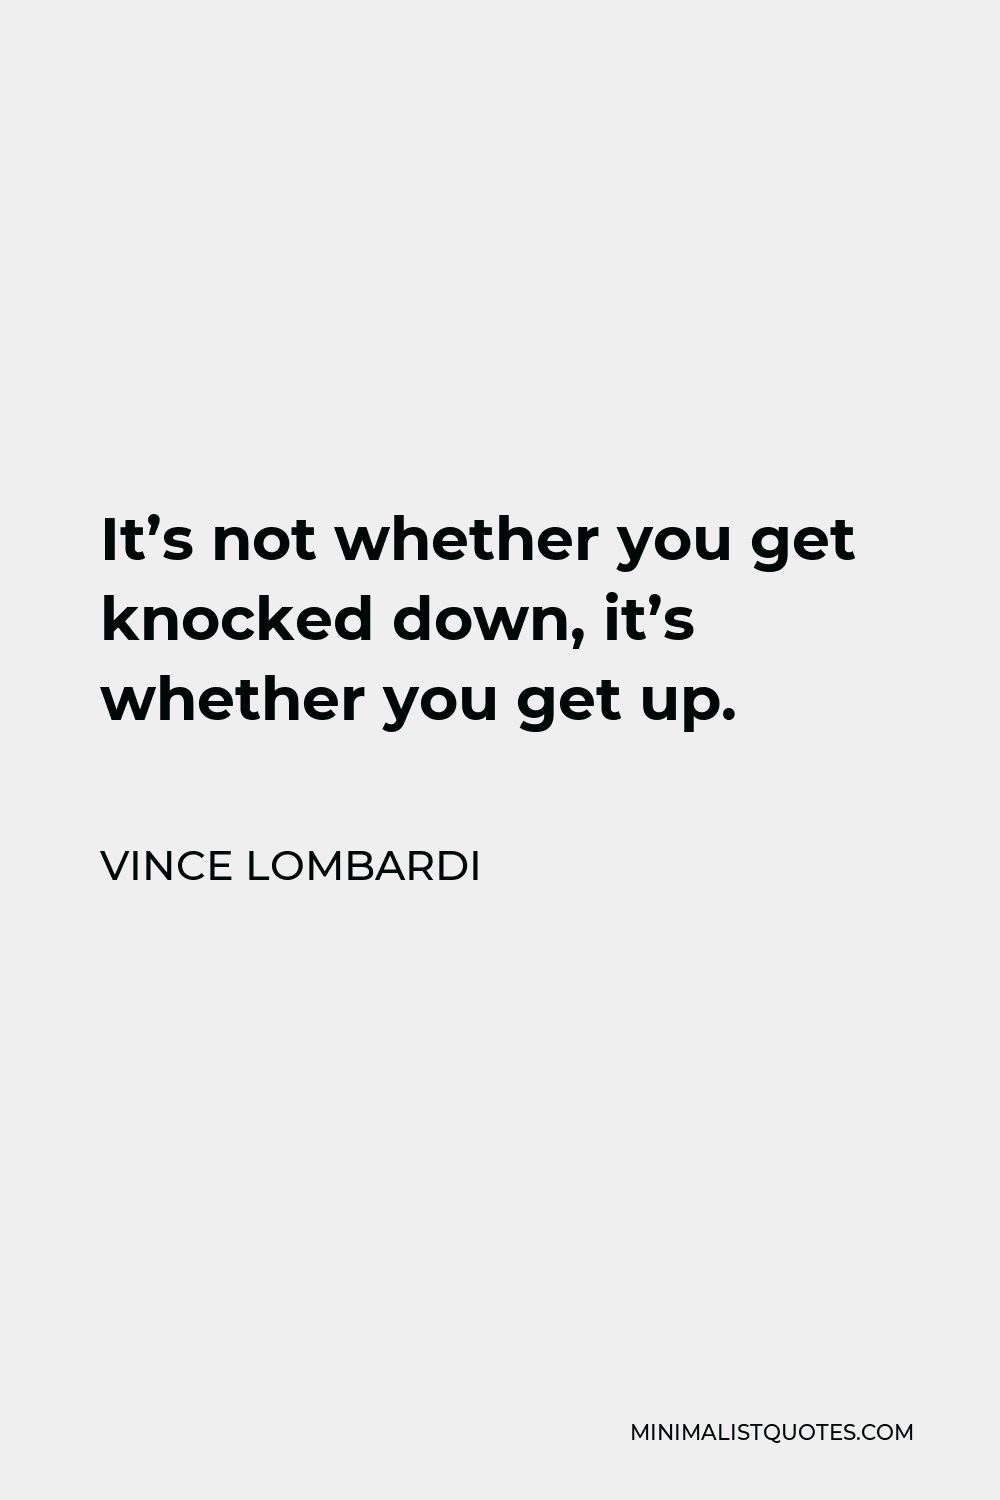 Vince Lombardi Quote - It’s not whether you get knocked down, it’s whether you get up.